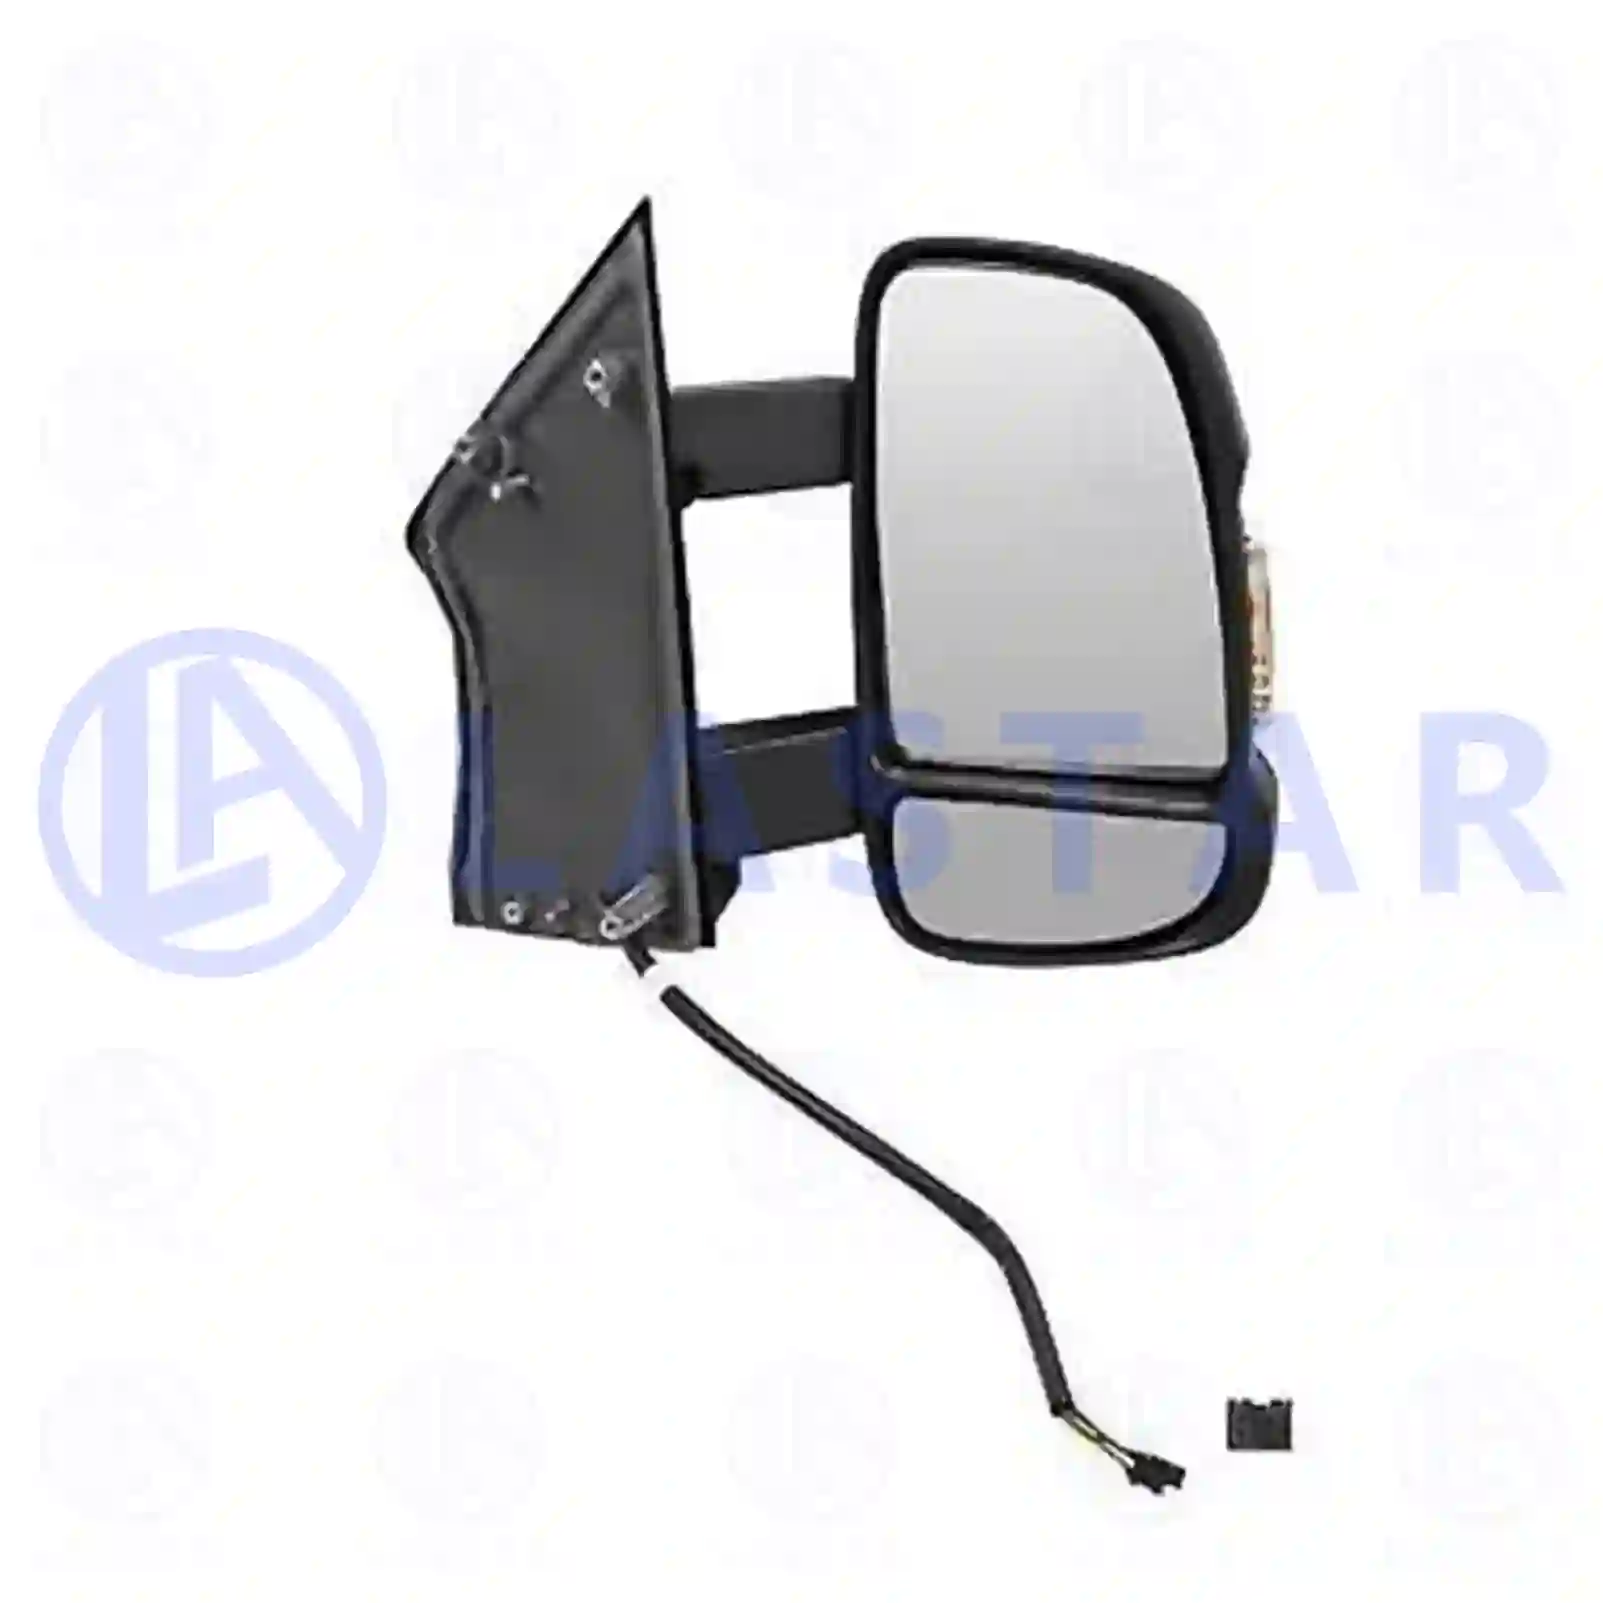 Main mirror, right, heated, electrical, 77721384, 1613689380, 8154KT, 735424398, 735440389, 735480888, 735517042, 735620710, 71778705, 1613689380, 8154KT ||  77721384 Lastar Spare Part | Truck Spare Parts, Auotomotive Spare Parts Main mirror, right, heated, electrical, 77721384, 1613689380, 8154KT, 735424398, 735440389, 735480888, 735517042, 735620710, 71778705, 1613689380, 8154KT ||  77721384 Lastar Spare Part | Truck Spare Parts, Auotomotive Spare Parts